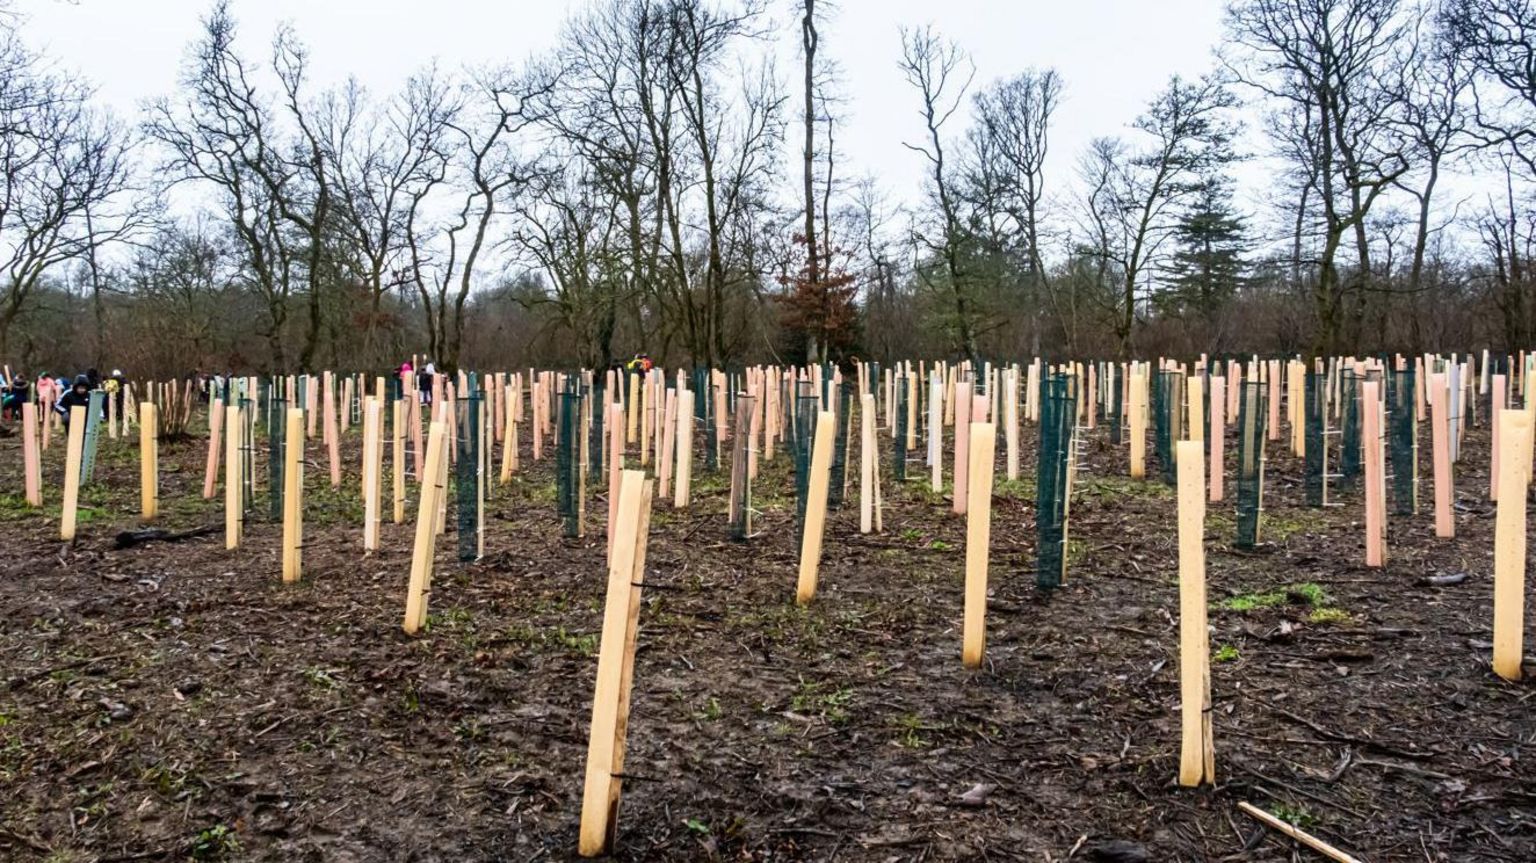 New saplings planted out in an arboretum 